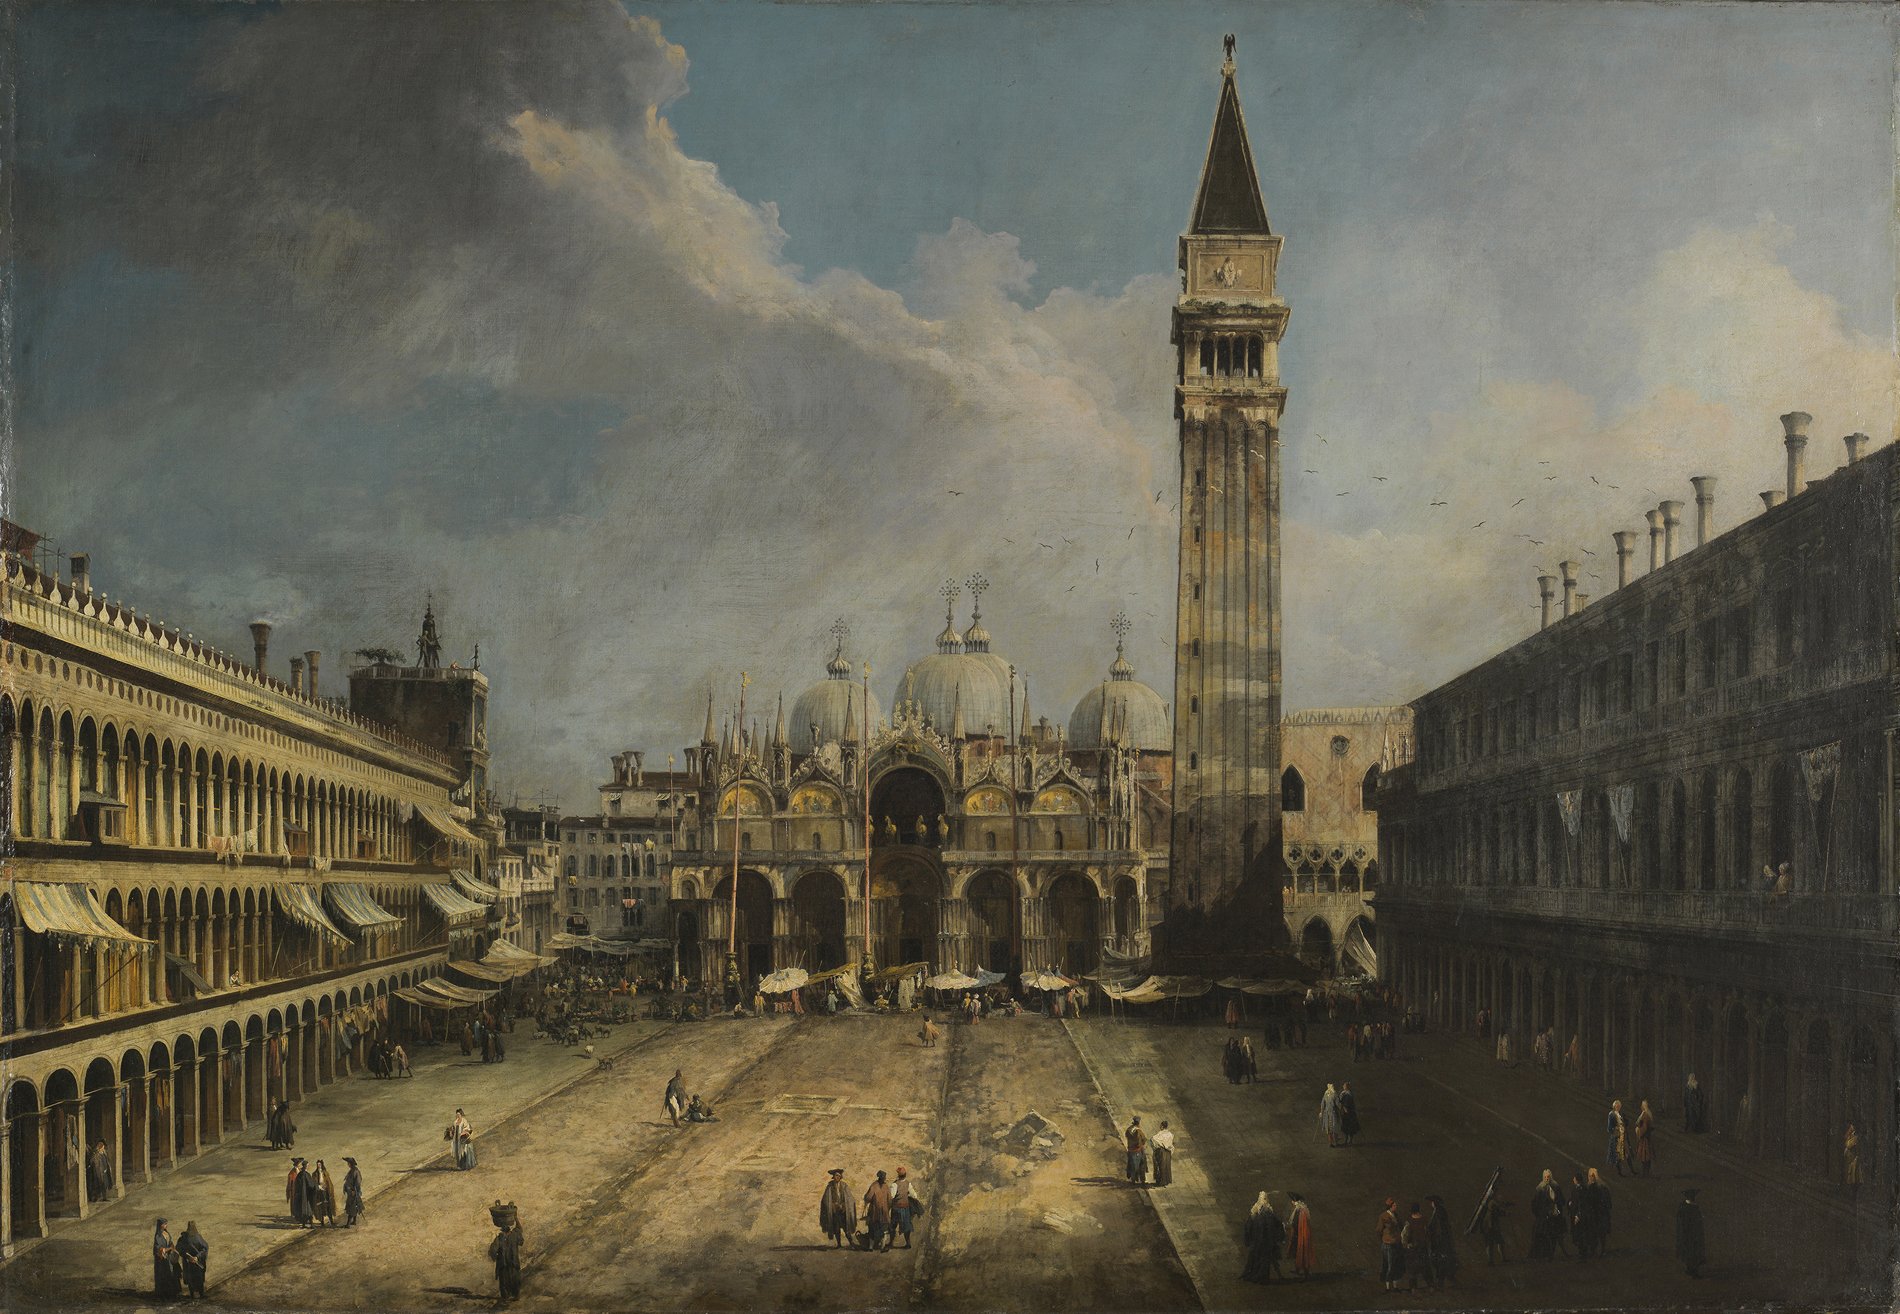 “The Piazza San Marco in Venice” by Canaletto before restoration